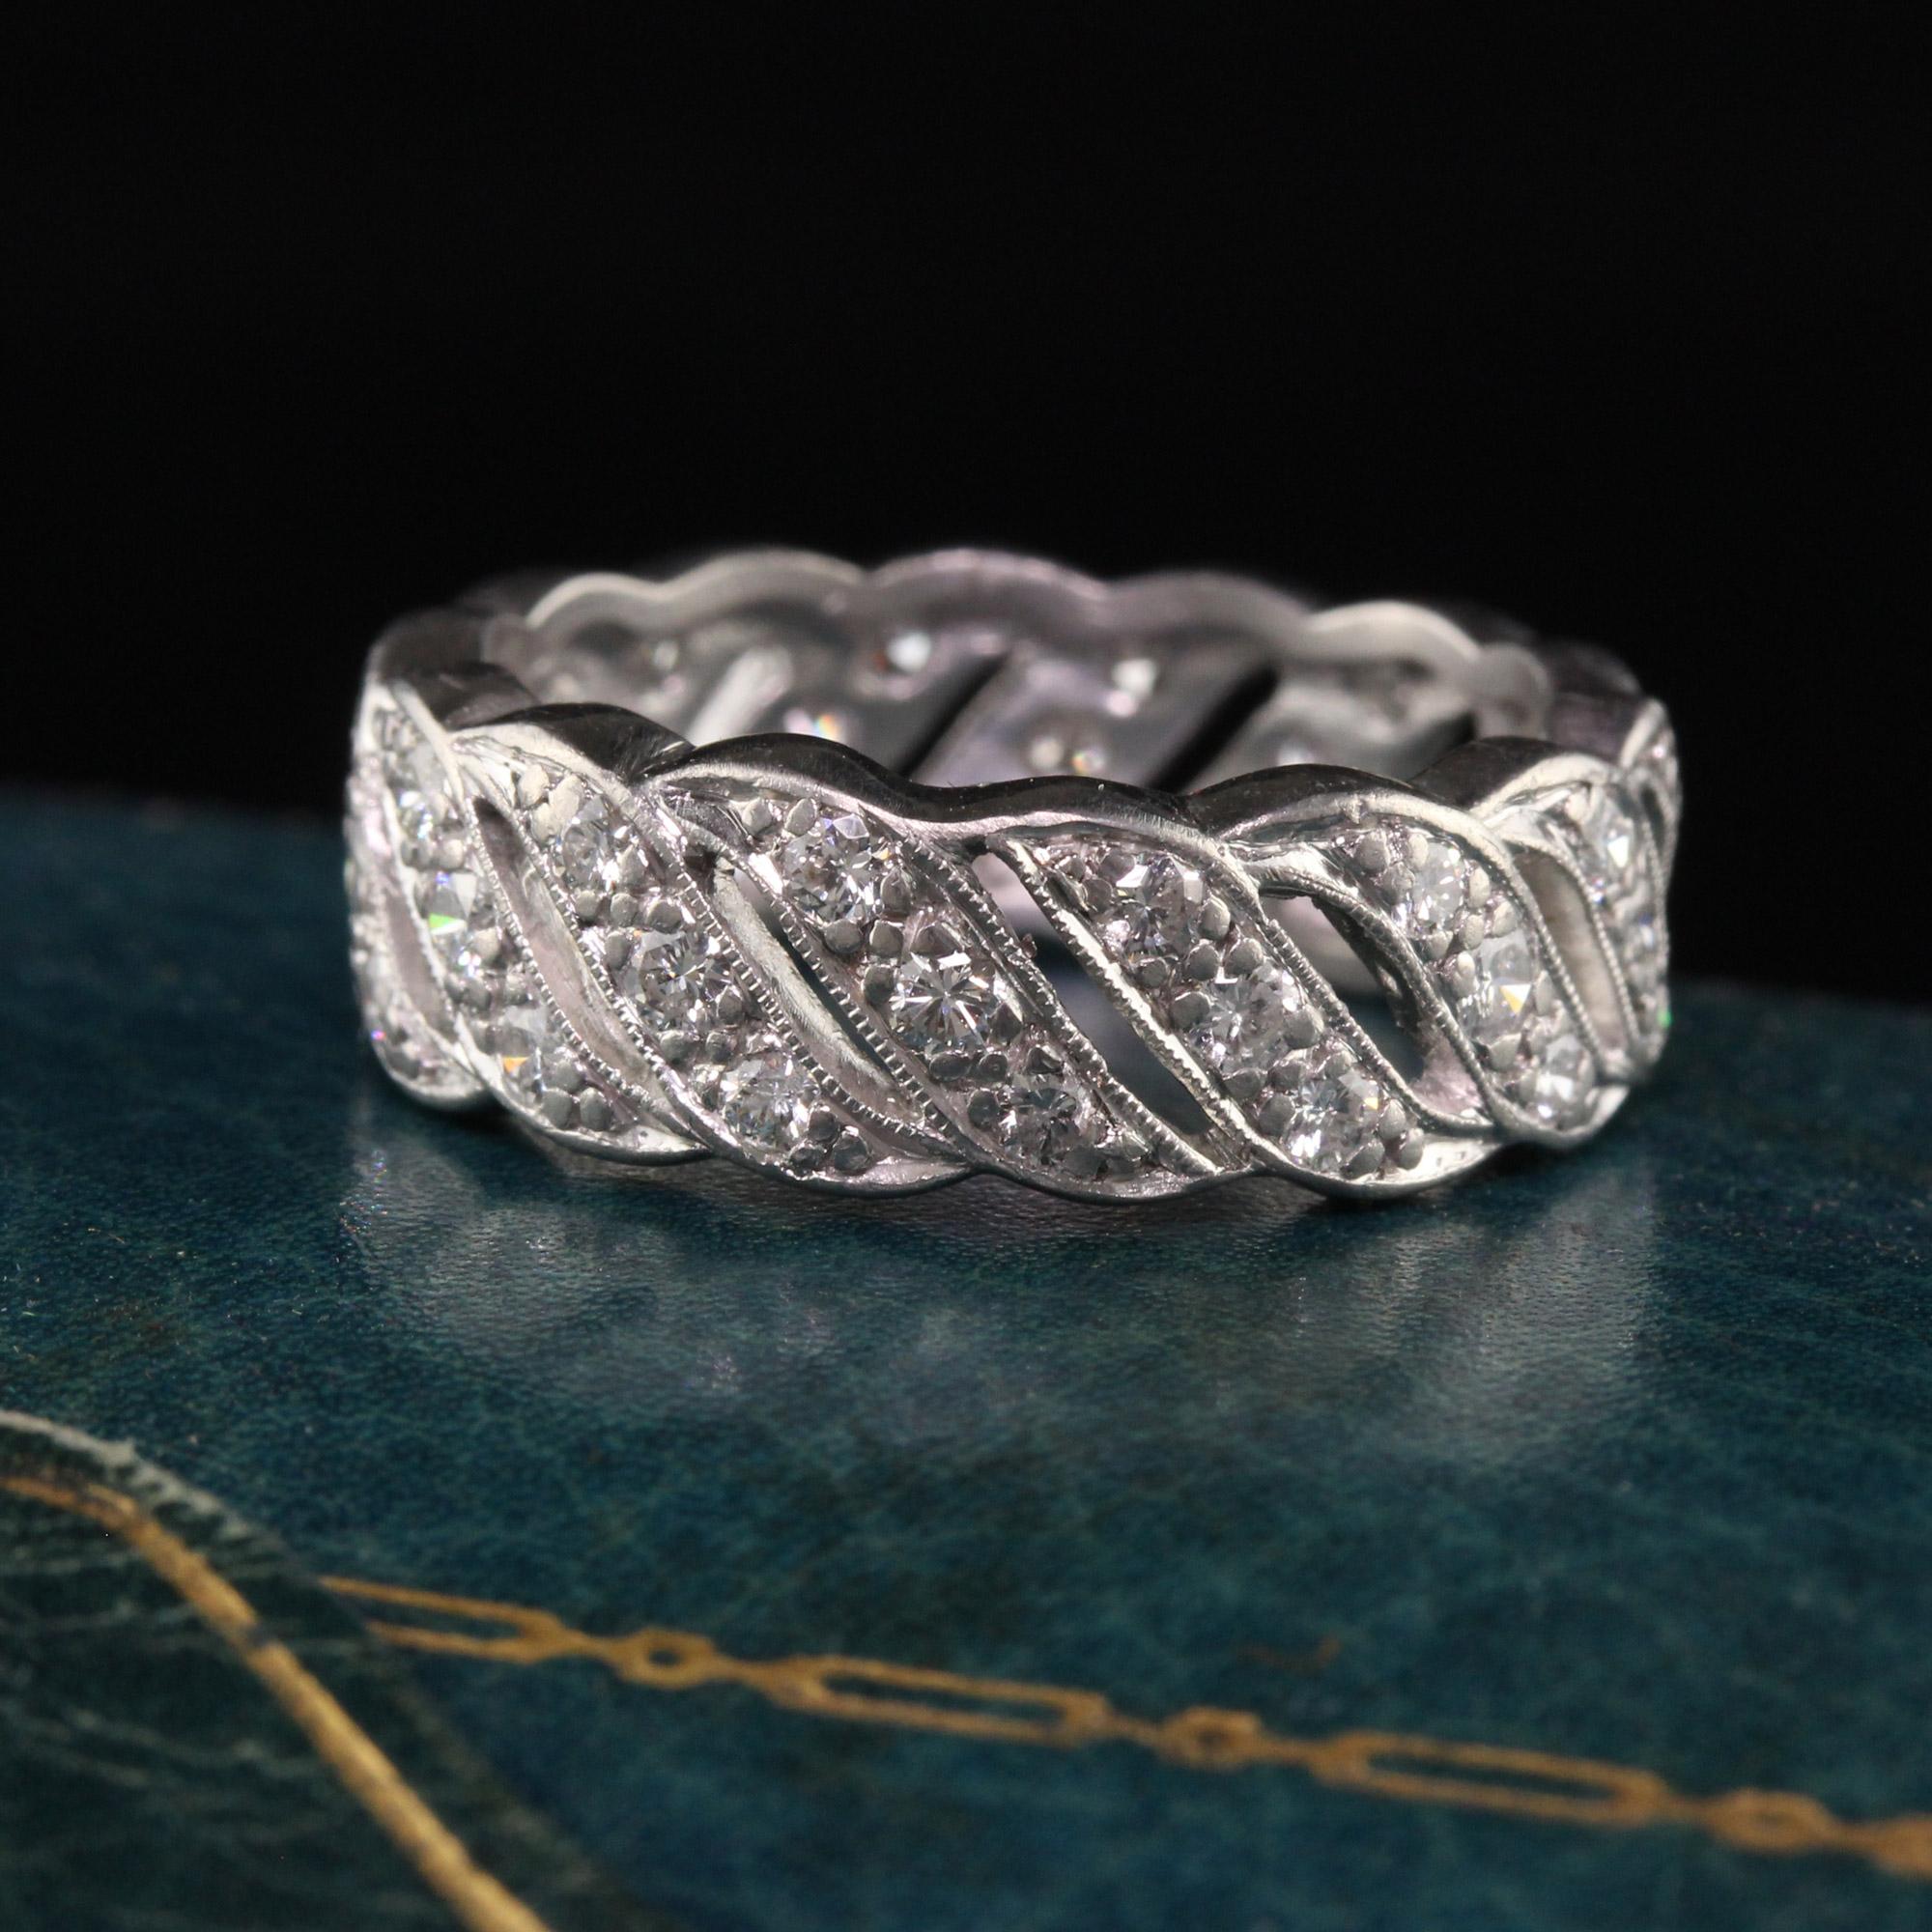 Beautiful Antique Art Deco Platinum Wide Diamond Eternity Band - Size 6. This incredible wedding band is crafted in platinum. There are diamonds set in a wave pattern going around the entire ring.

Item #R1313

Metal: Platinum

Weight: 7